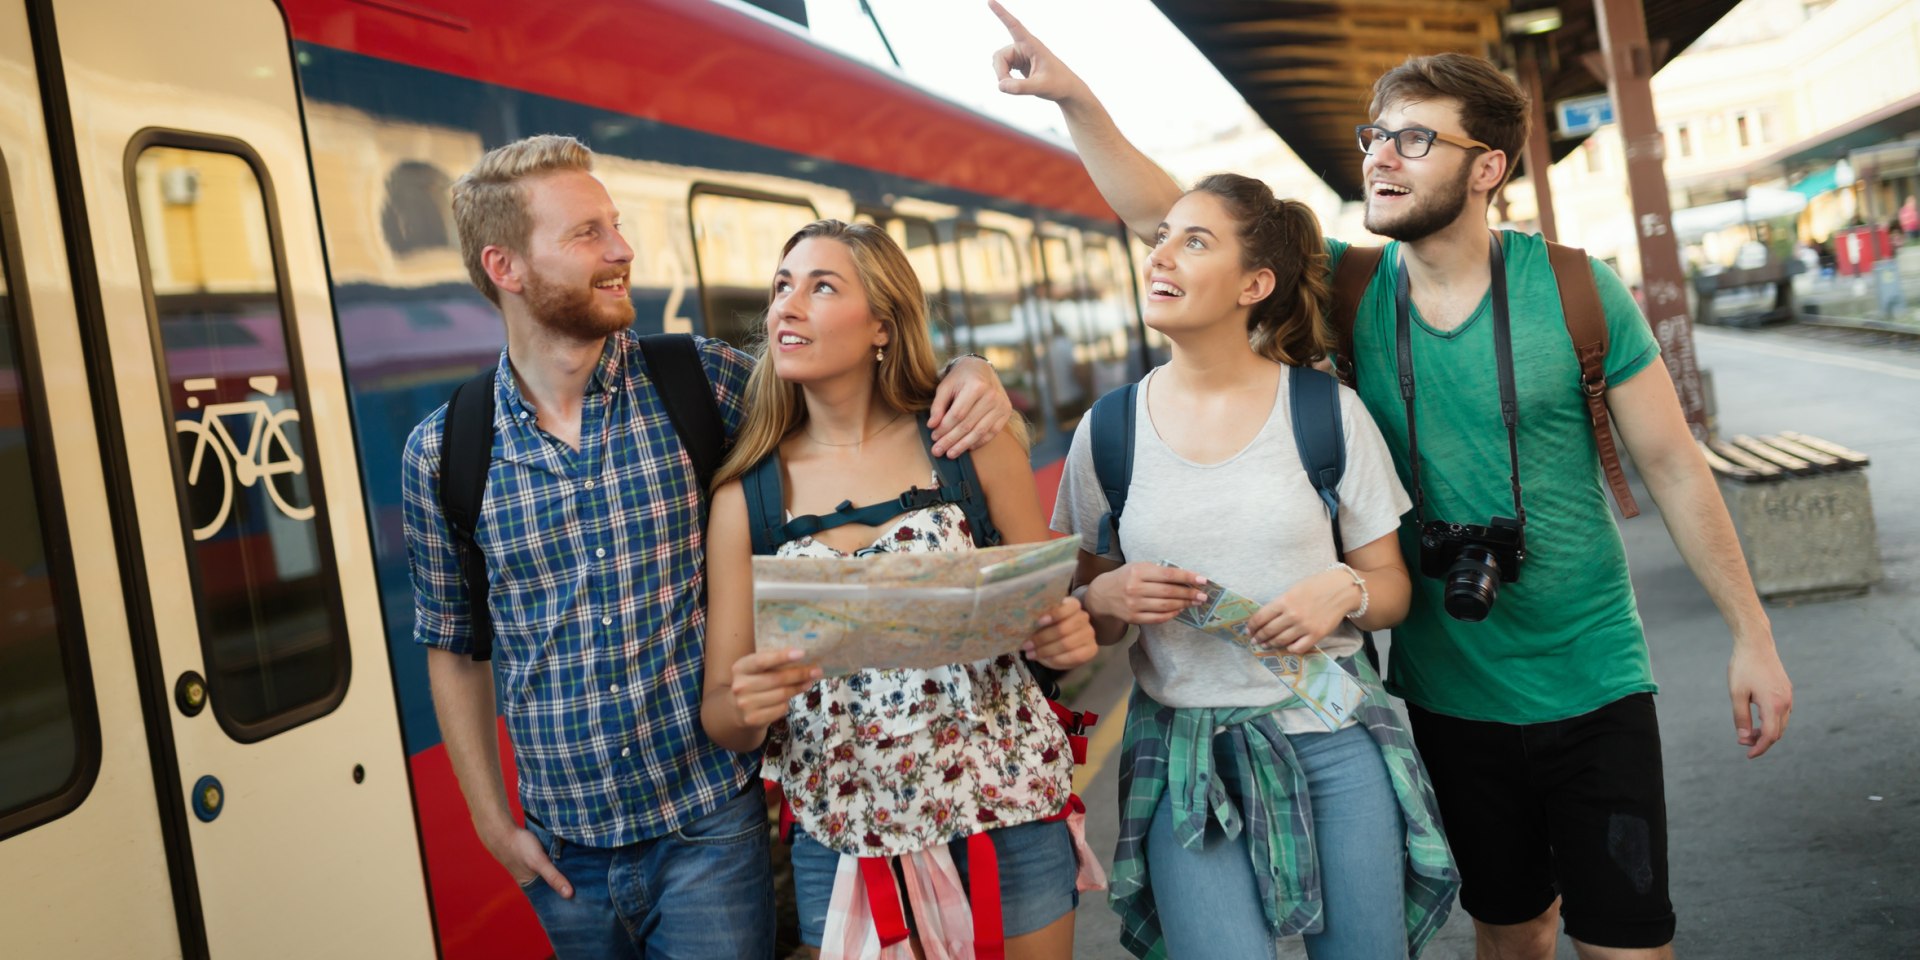 Group at the train station, © Fotolia / nd3000